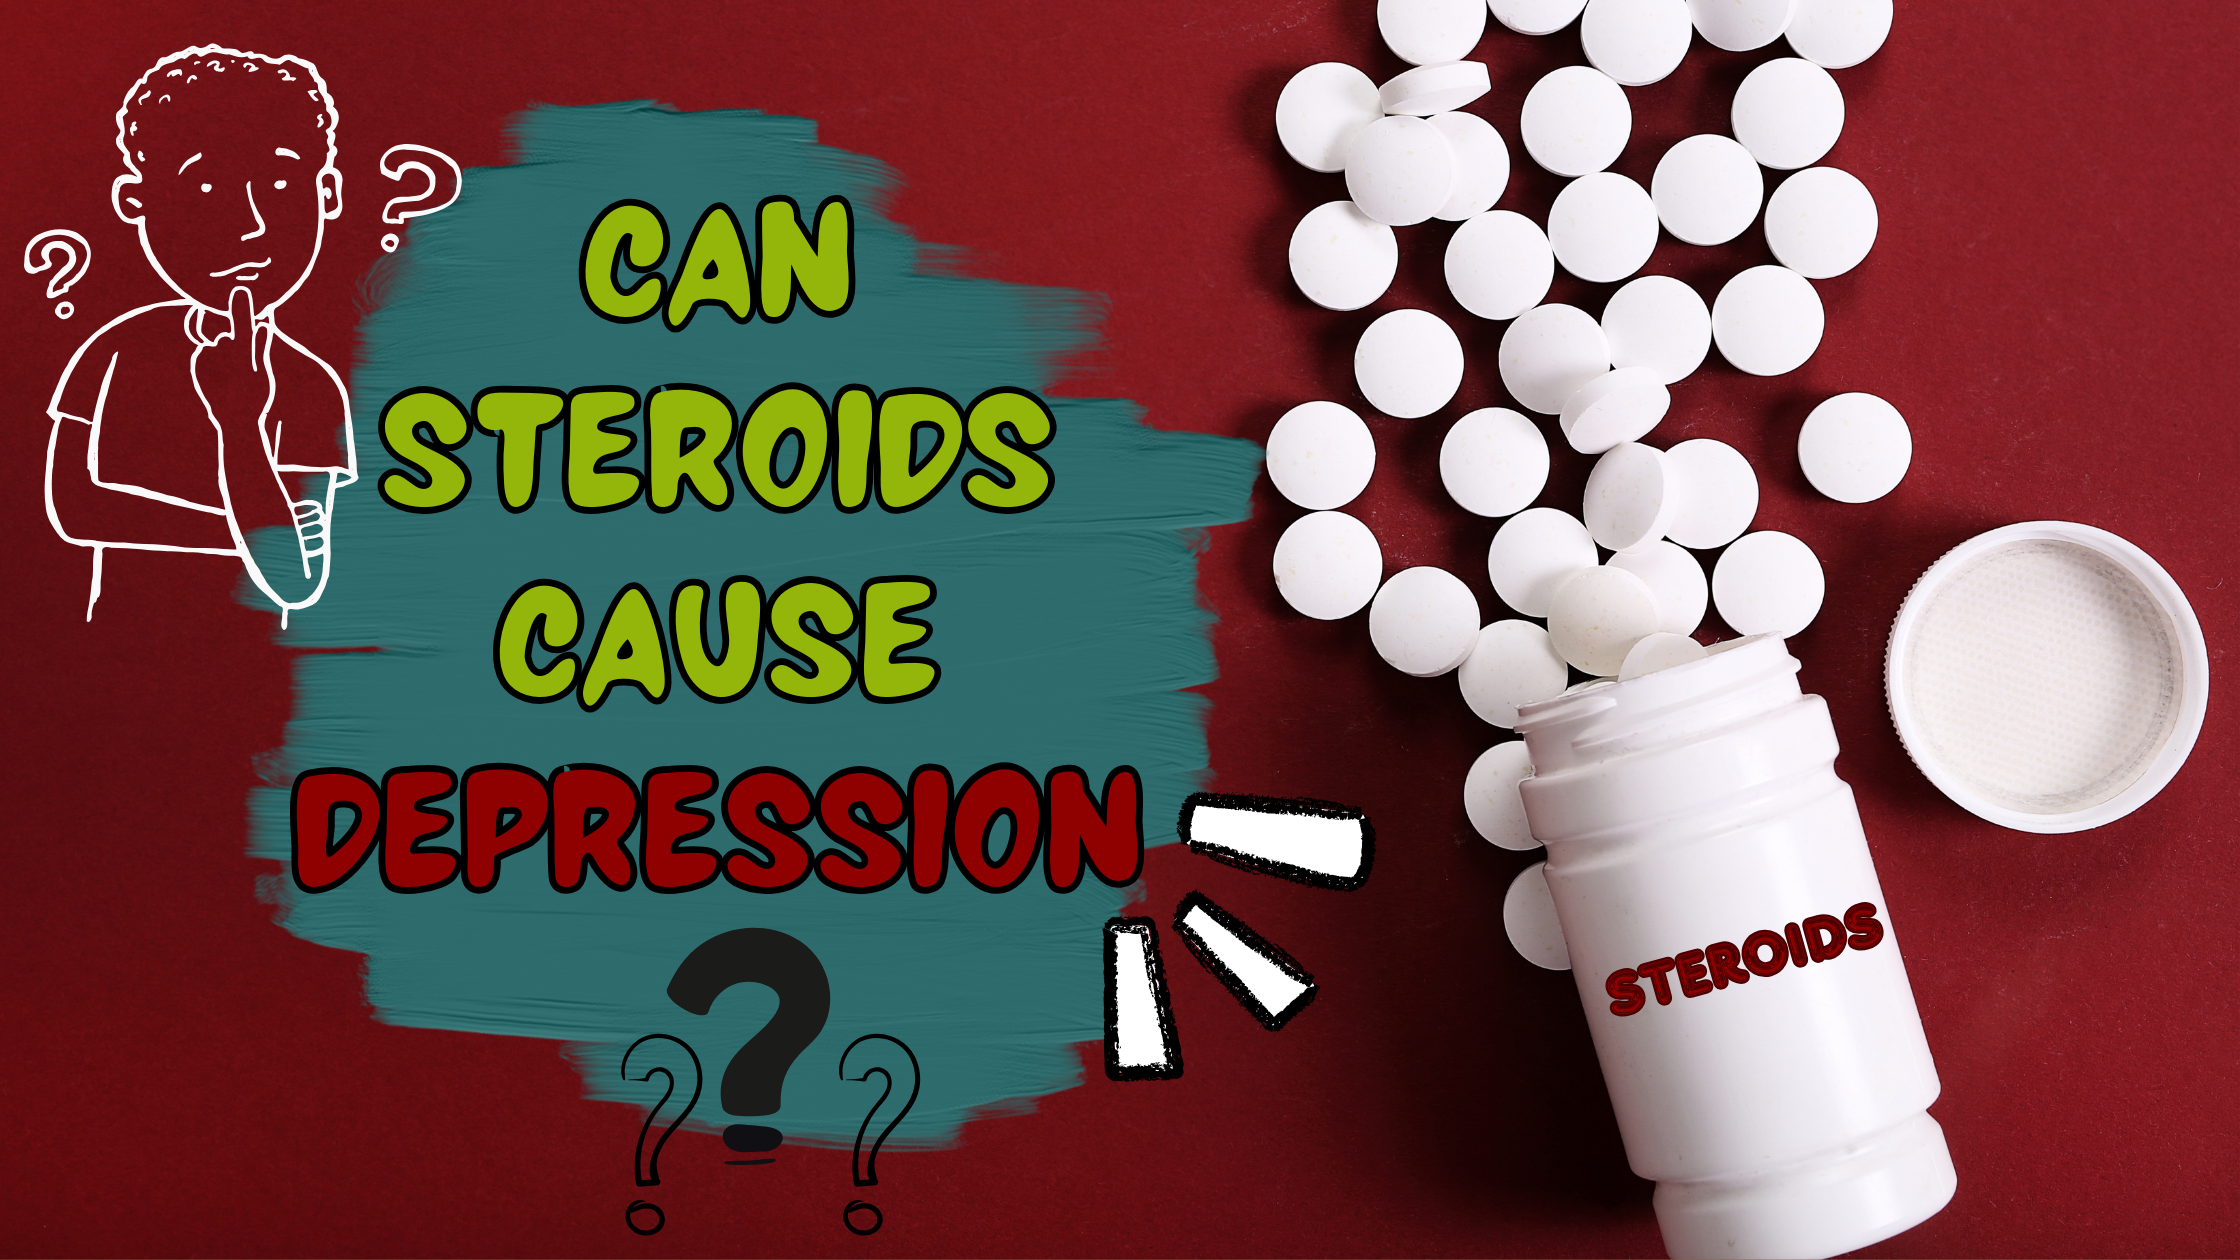 Can steroids cause depression